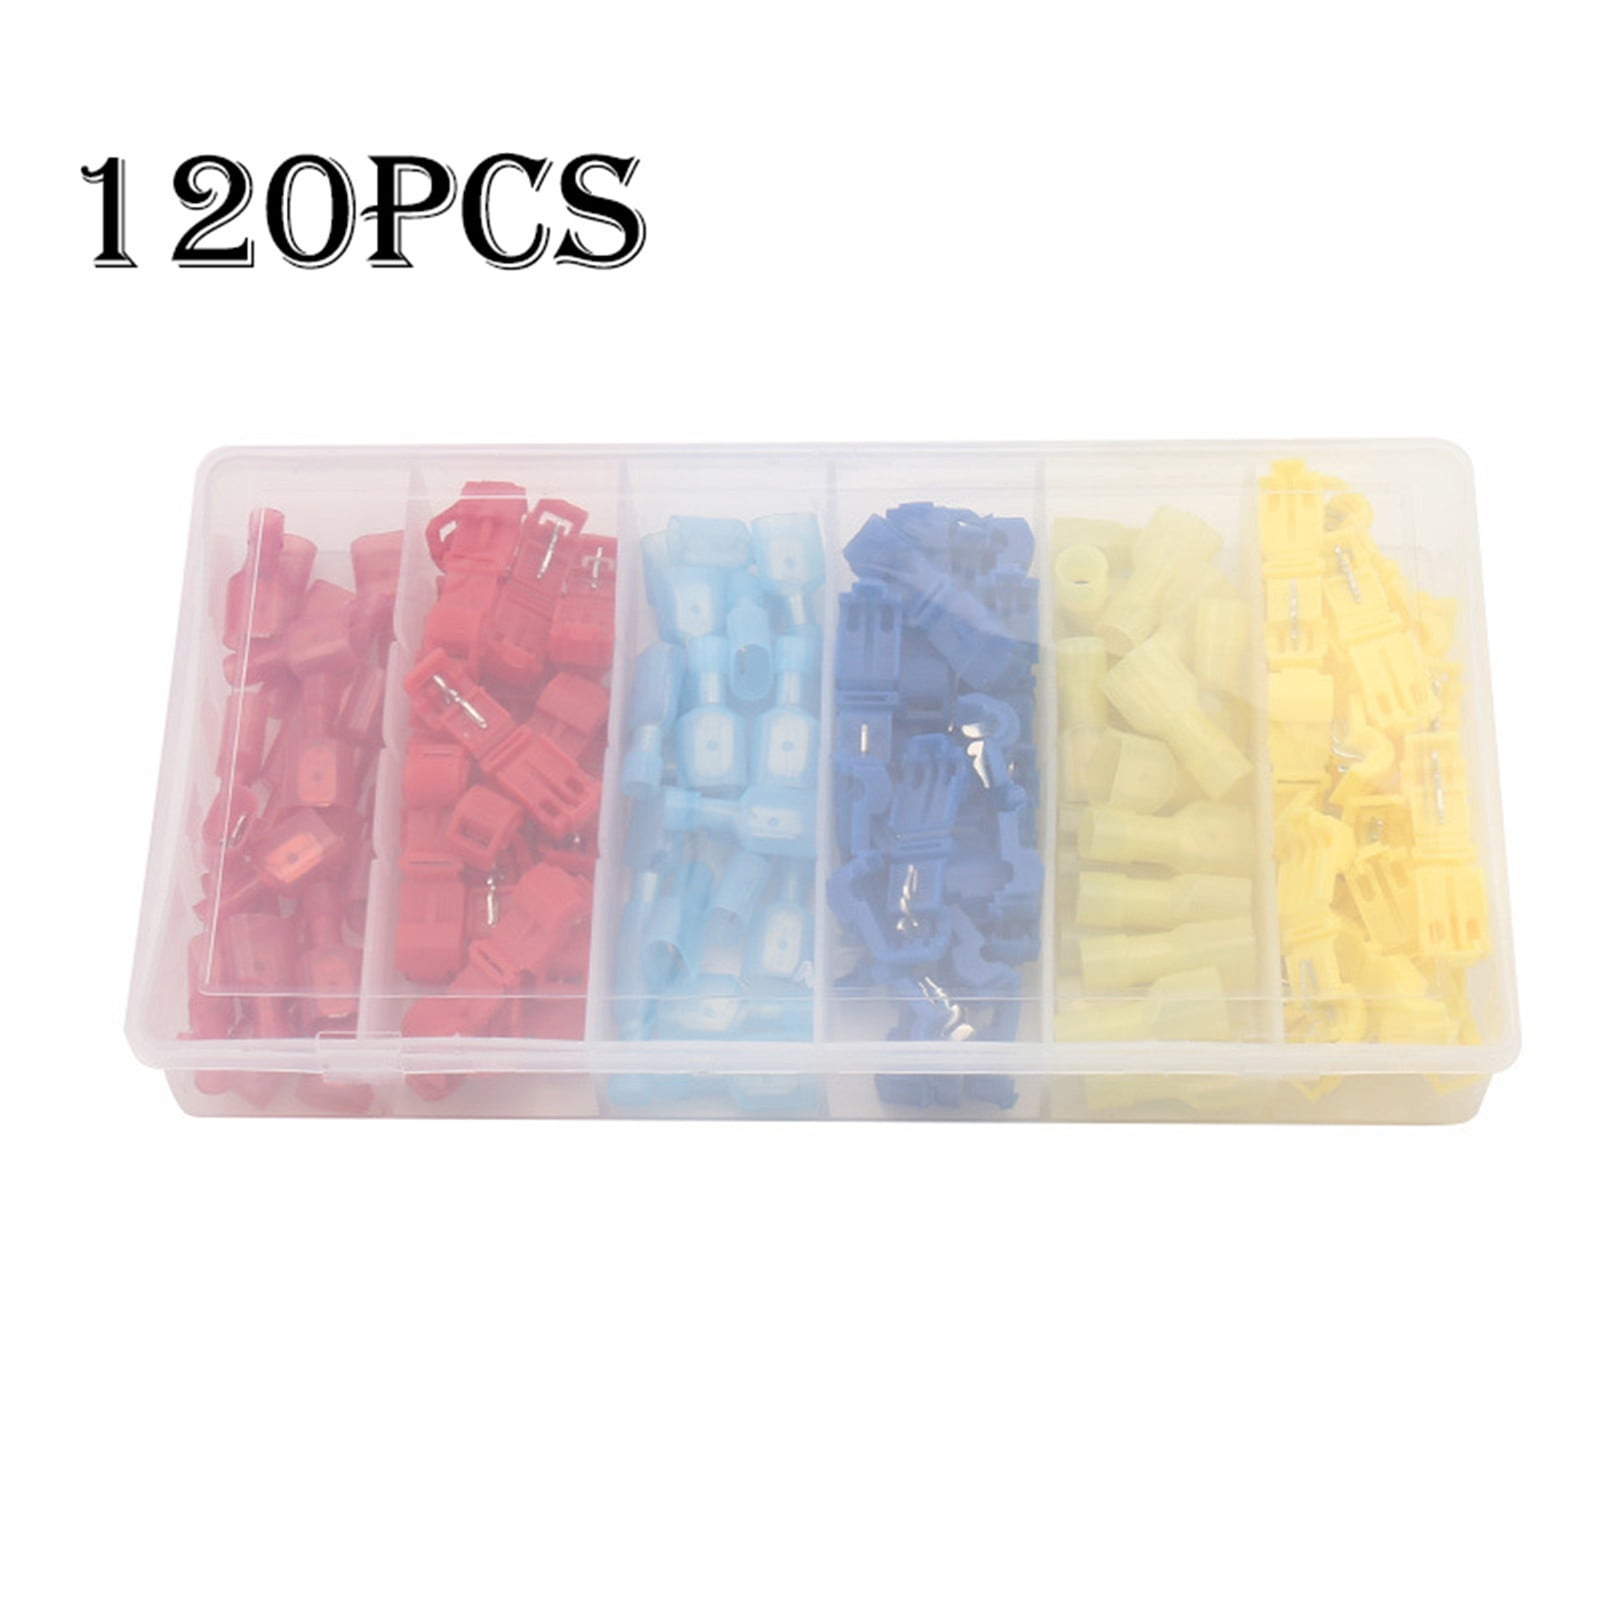 120pc Insulated 22-10 AWG T-Taps Quick Splice Wire Terminal Connectors Combo Kit